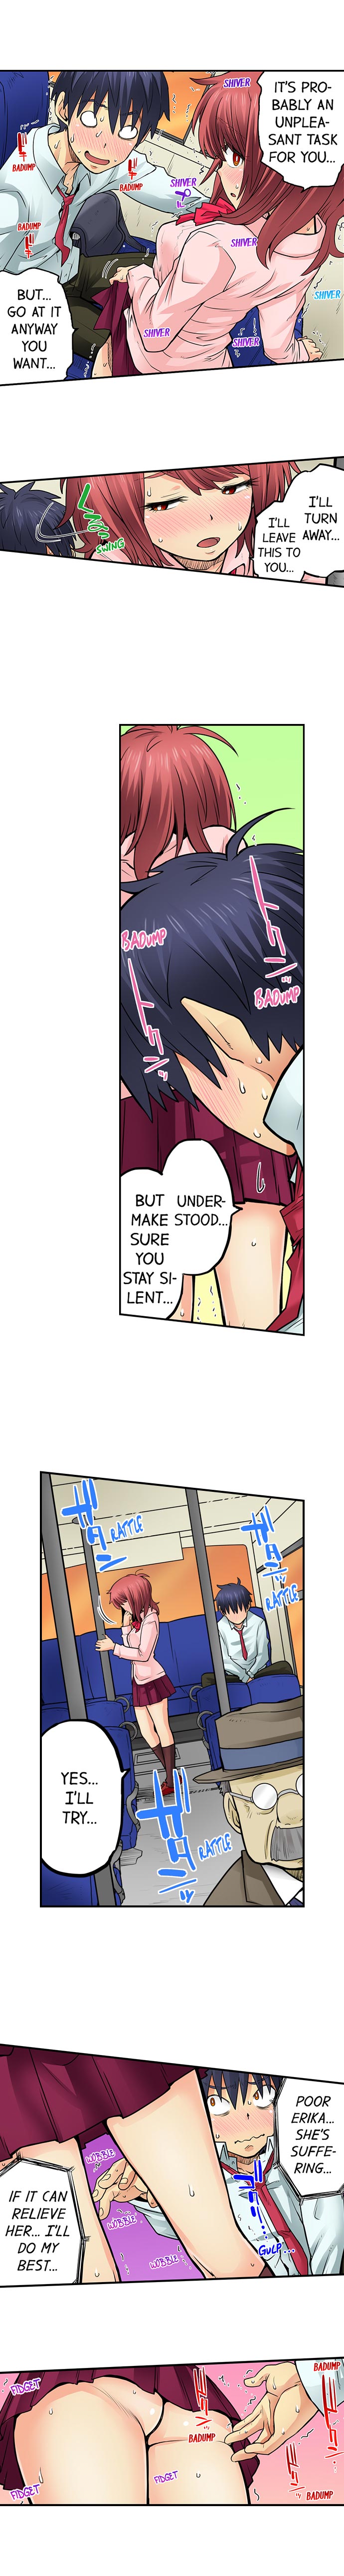 My Classmate is My Dad’s Bride, But in Bed She’s Mine. - Chapter 45 Page 5